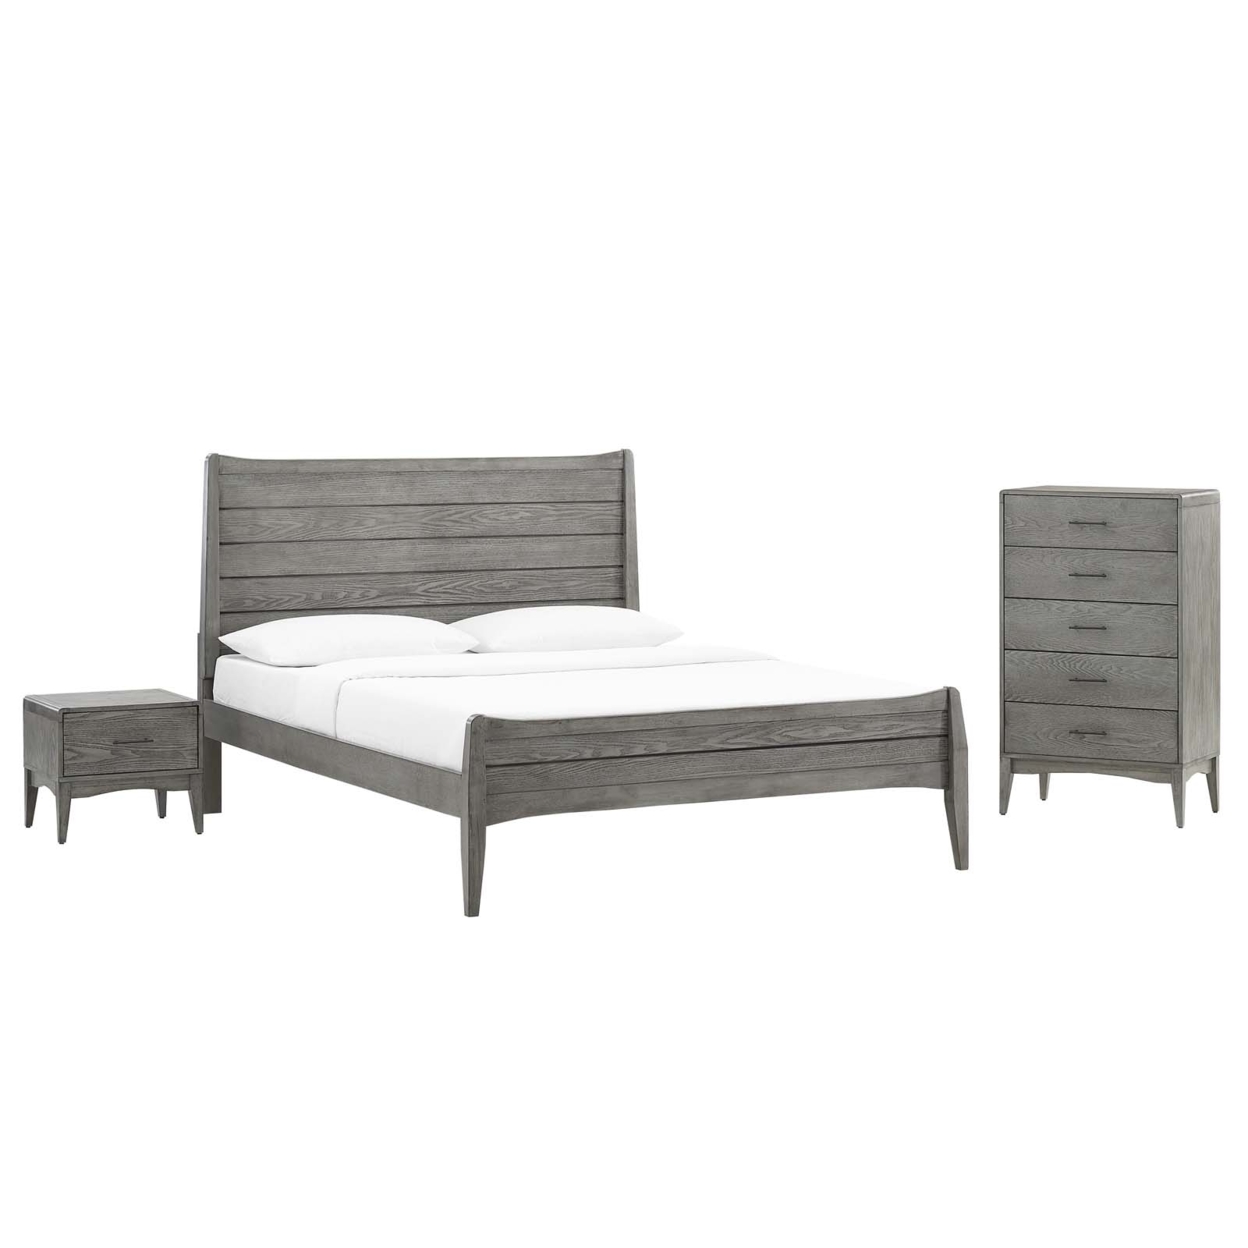 3 Piece Wooden Farmhouse Full Queen Bed Nightstand And Chest Set, Gray, Saltoro Sherpi